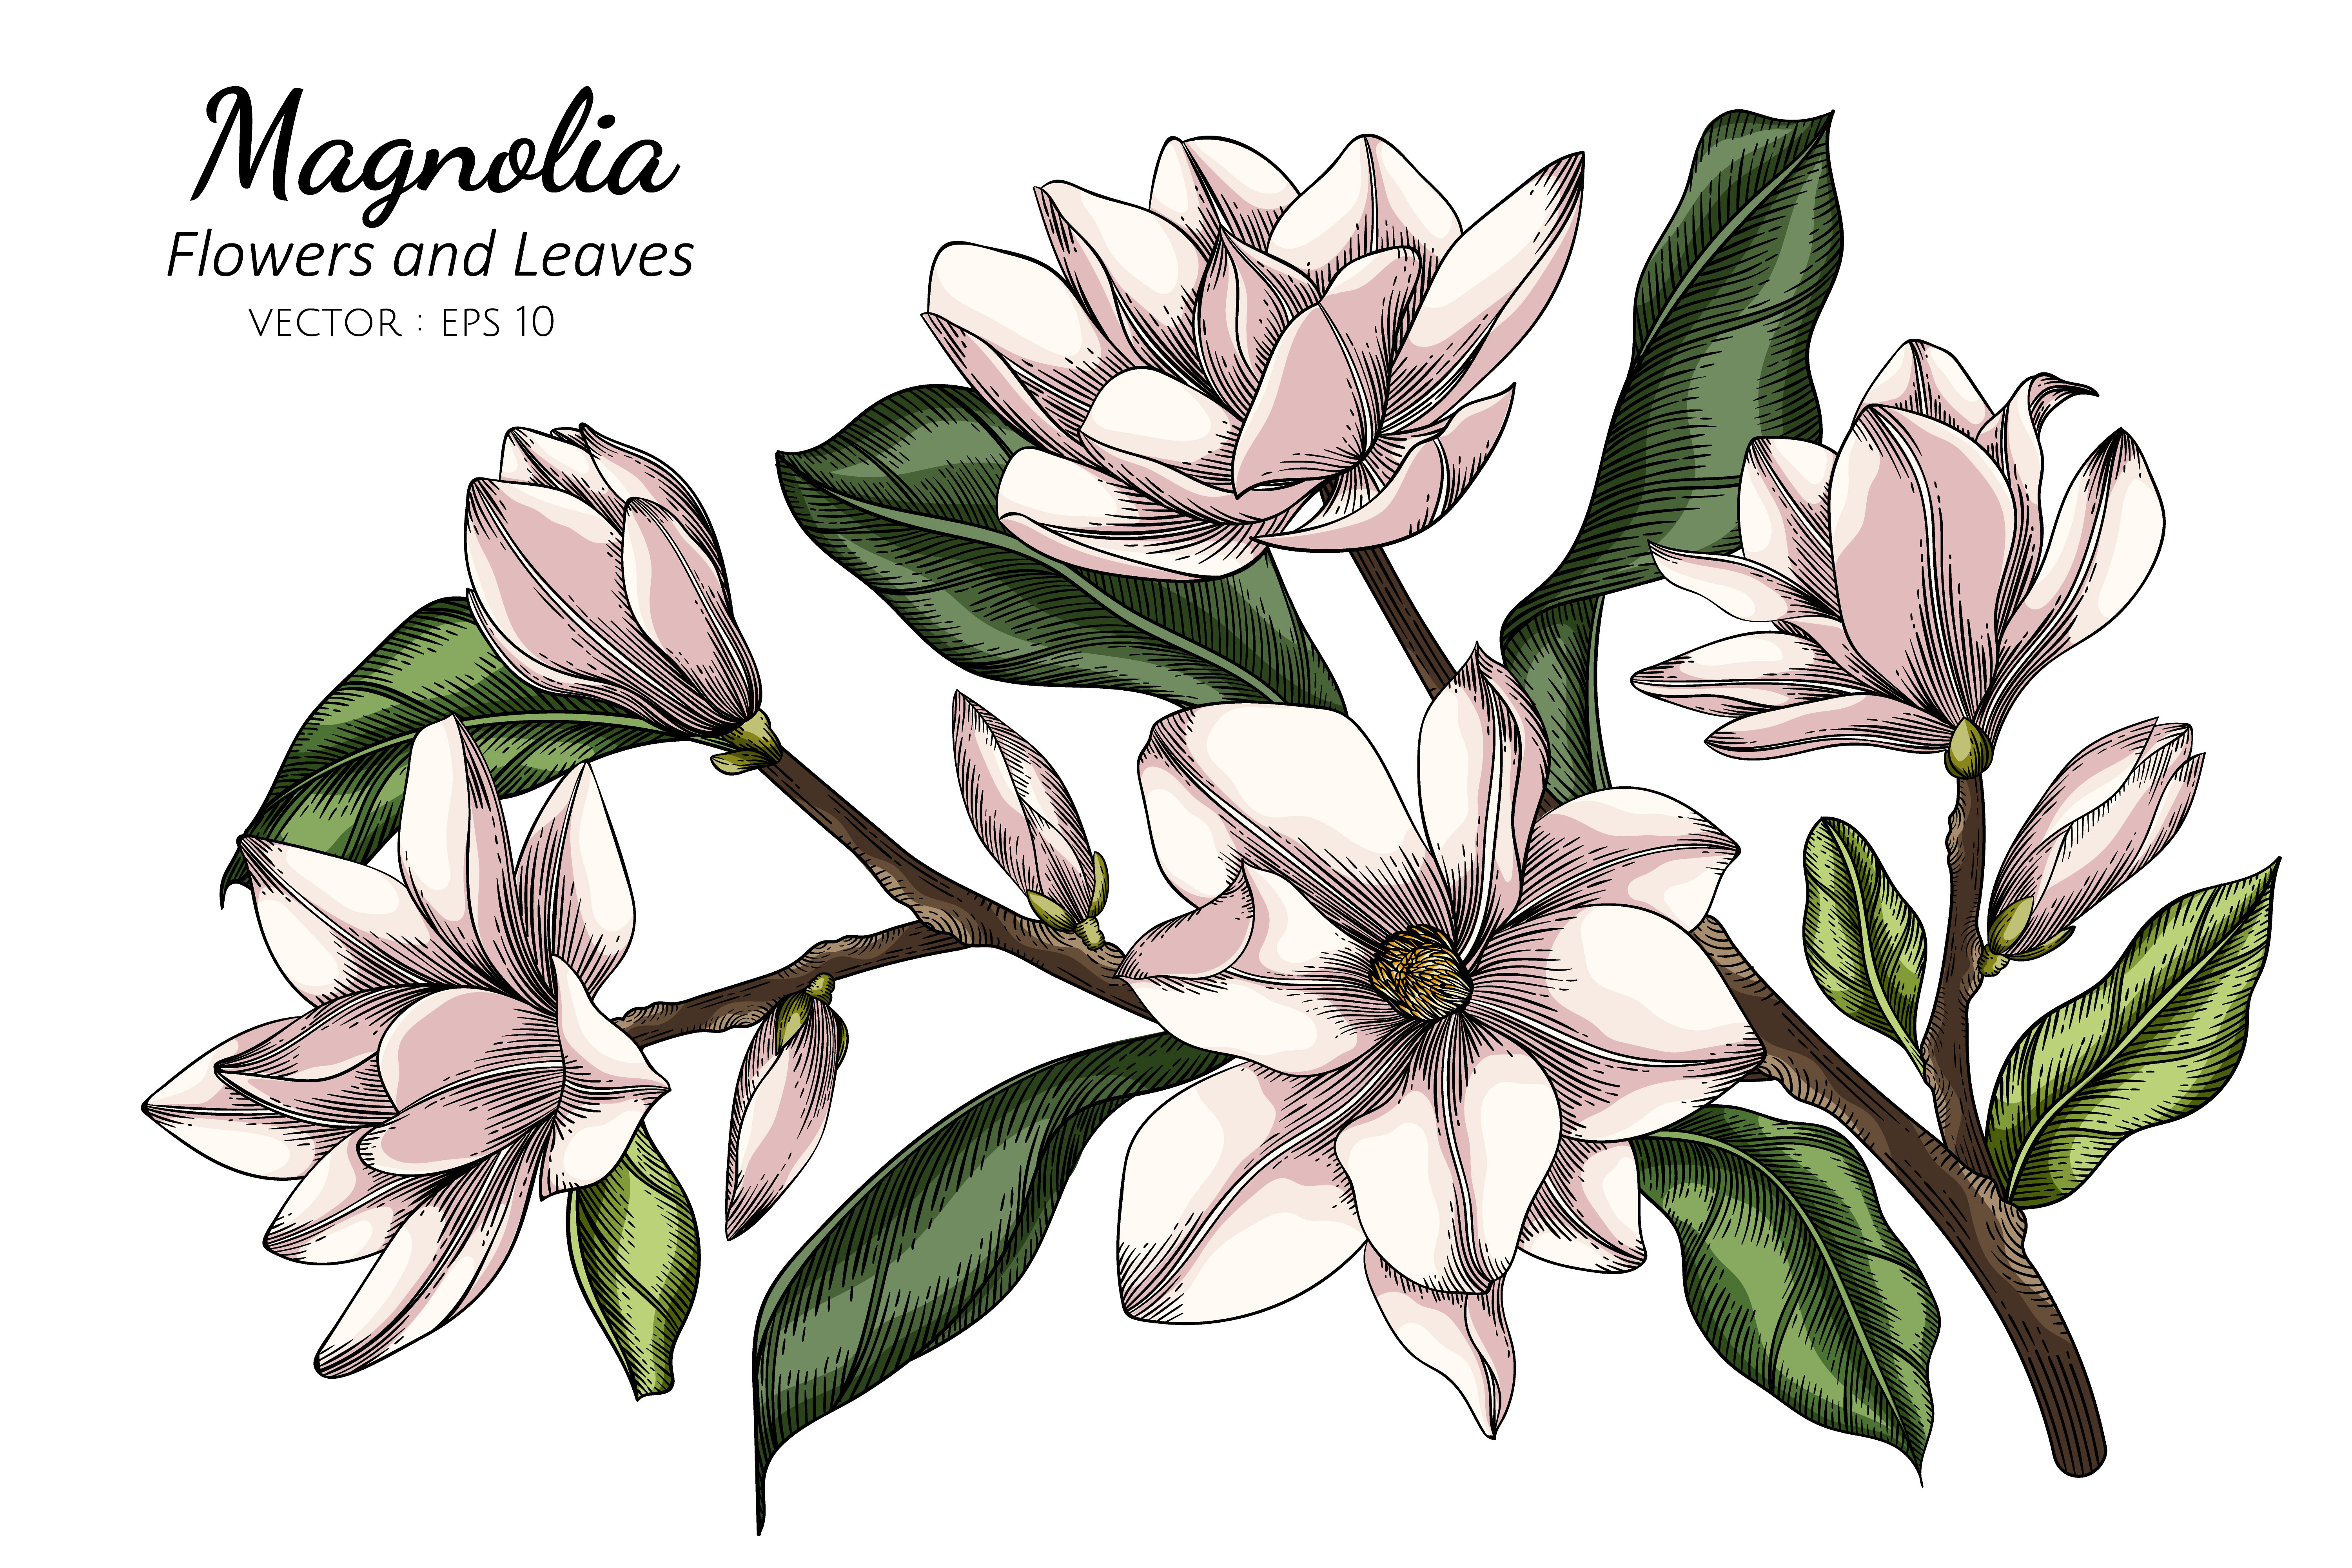 White Magnolia Flowers and Leaves Drawing 1104784 Vector Art at Vecteezy